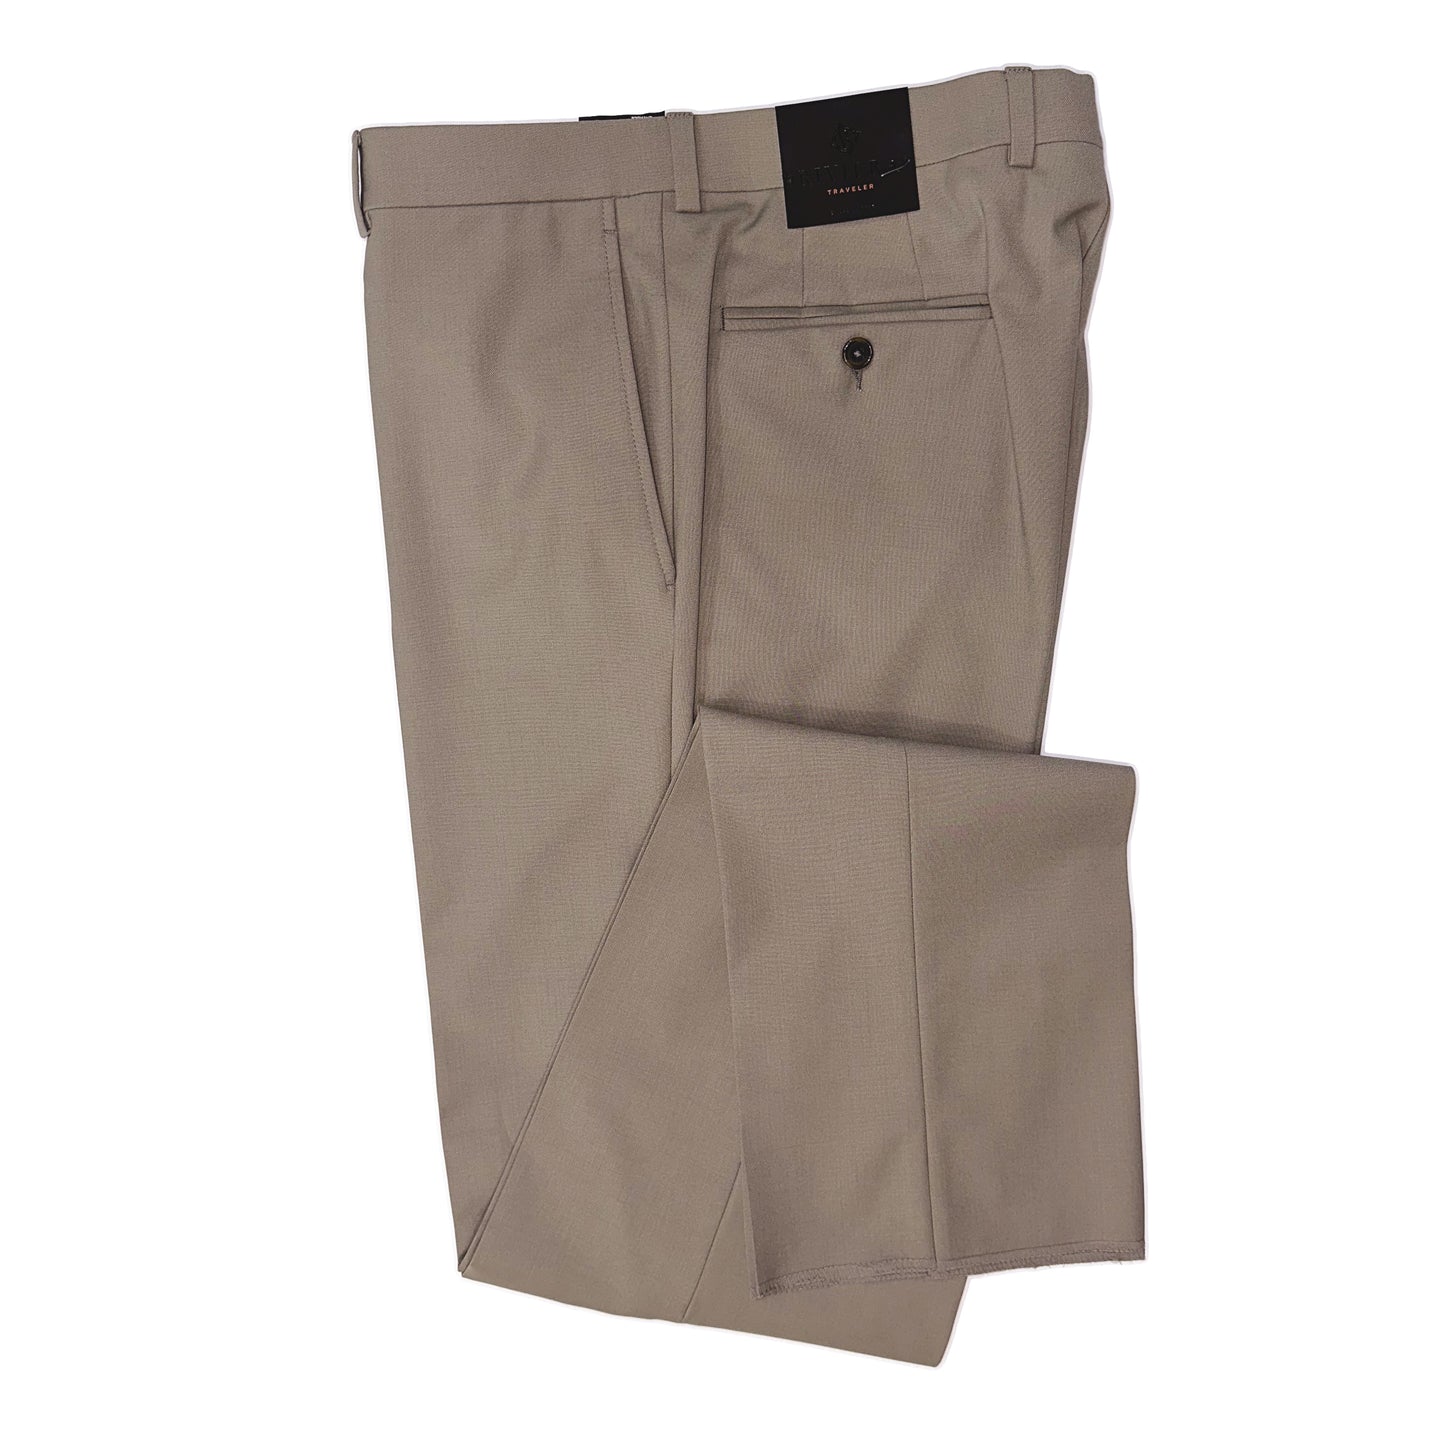 Riviera by Jack Victor- Traveler Dress Pant in Tan